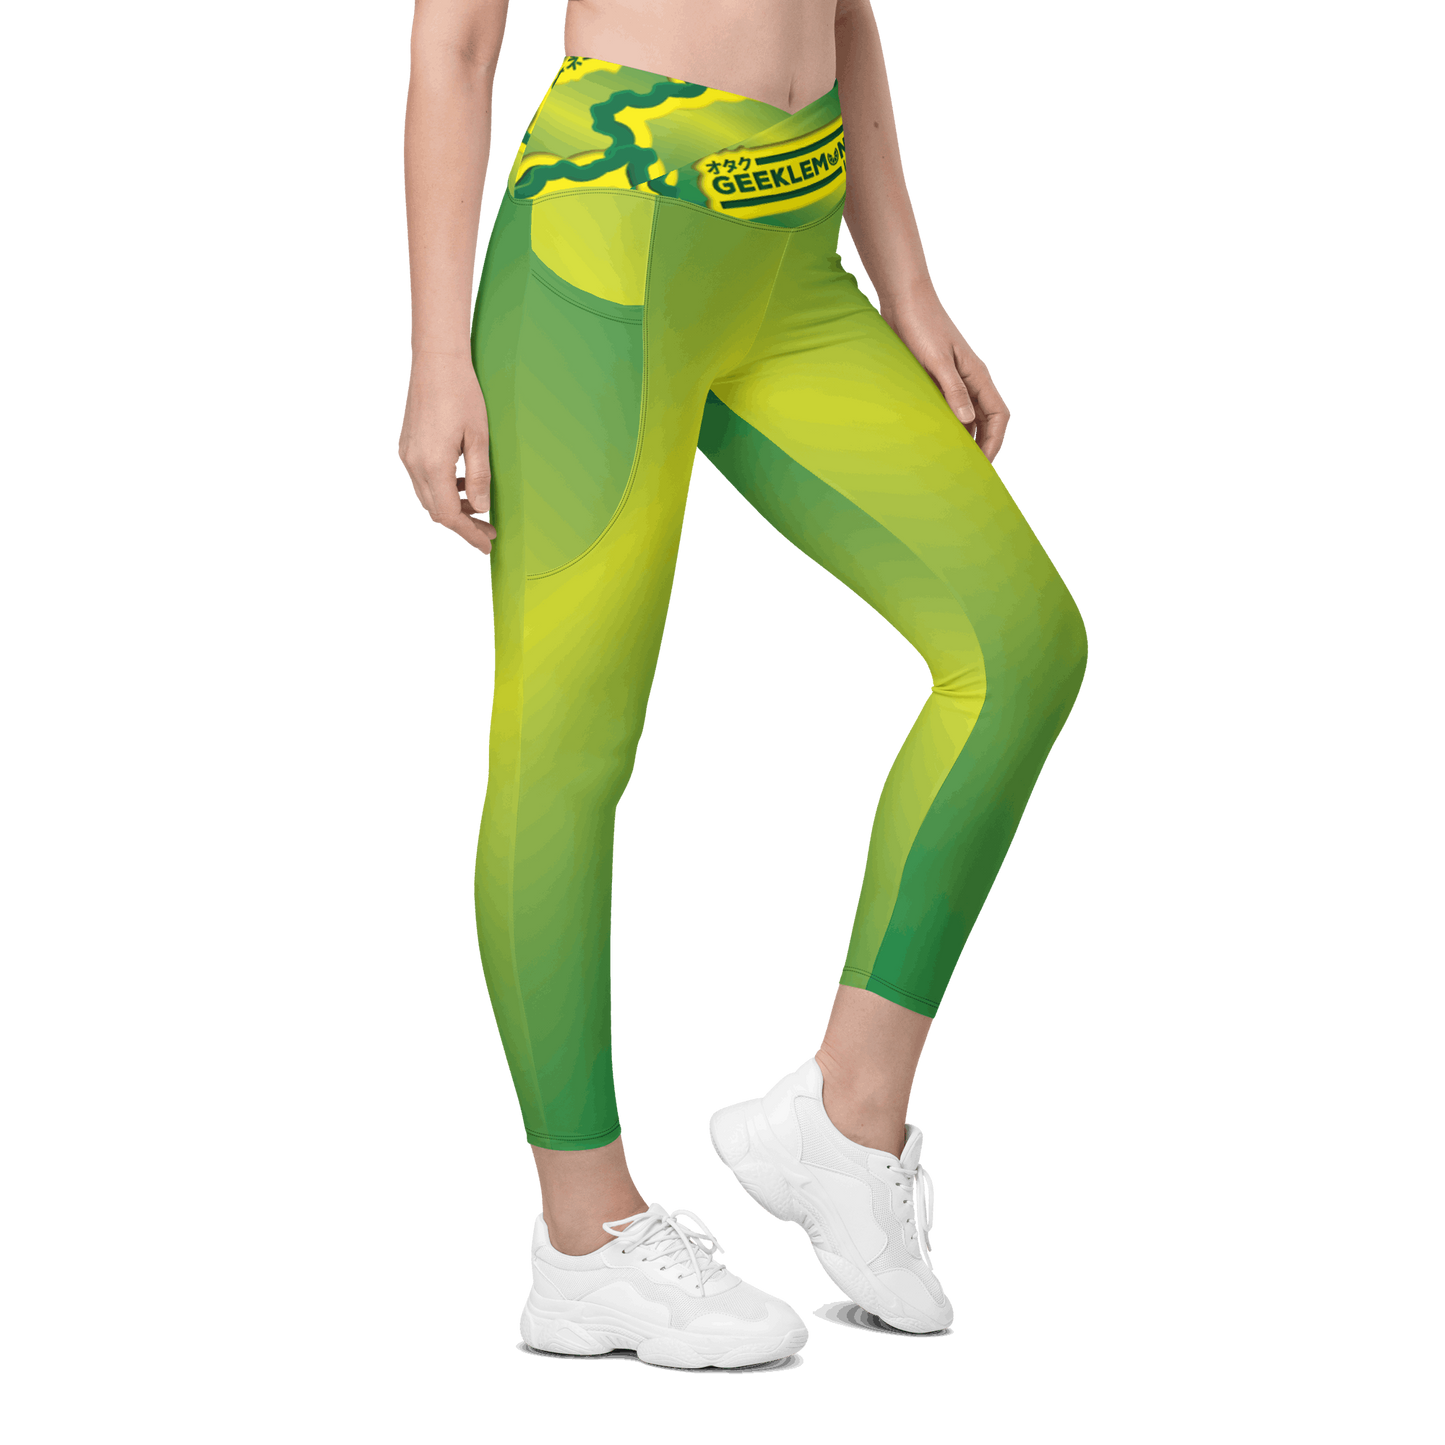 Geek's Pink & Purp - Green Crossover leggings with pockets